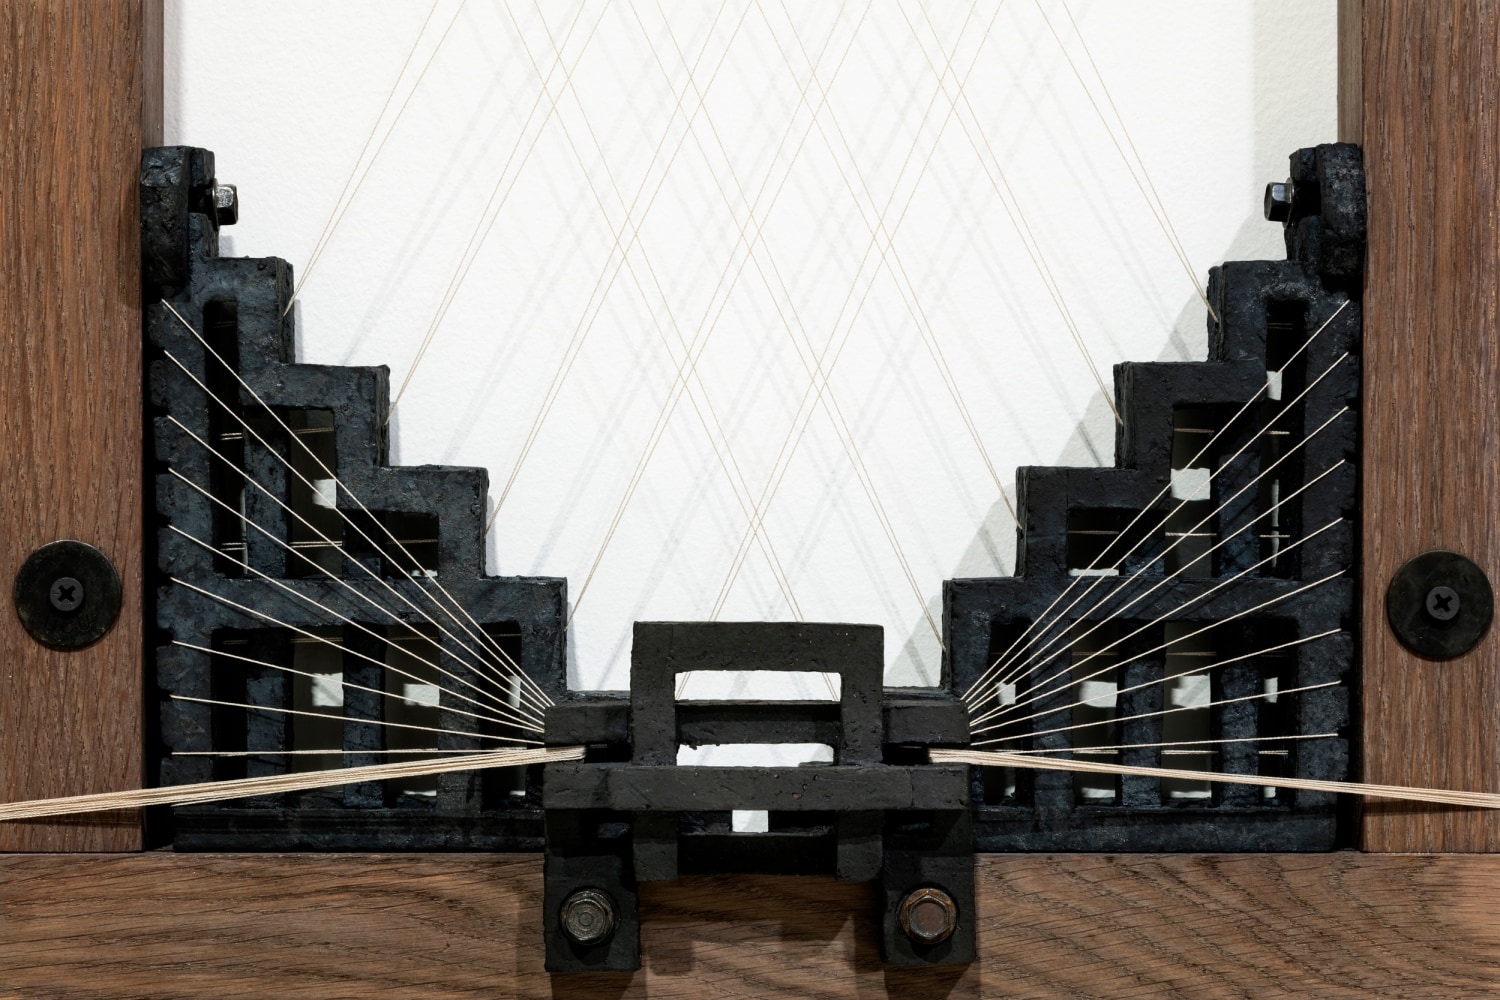 Vibe Overgaard

Threaded Square with Tower Fragment, 2023

Wood, unglazed ceramic, thread, metal bolts

40.6 x 35.6 x 5.1 cm
16 x 14 x 2 in

Unique